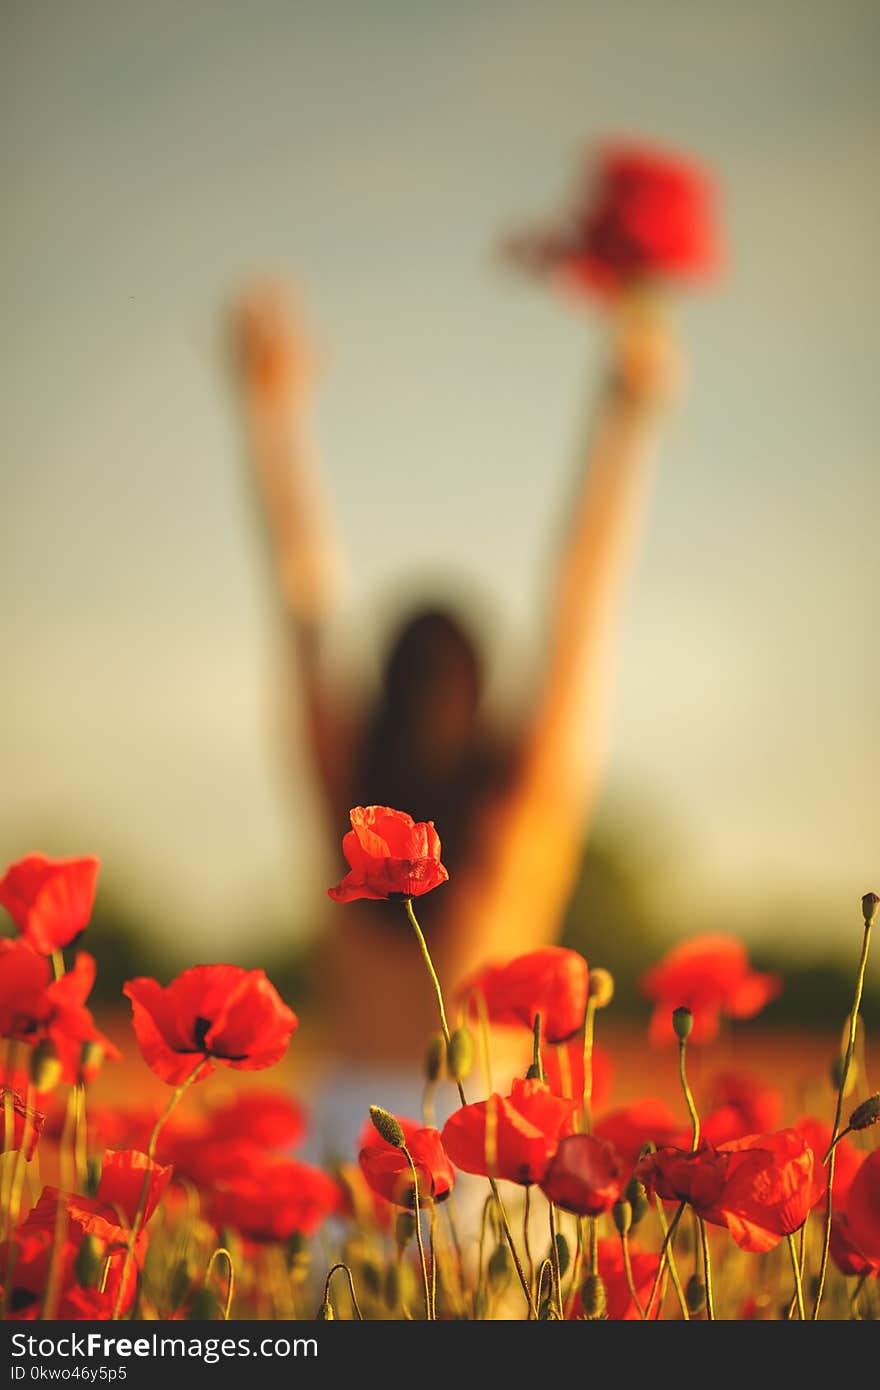 Woman in a field with poppies at sunset, in the sun, soft focus/